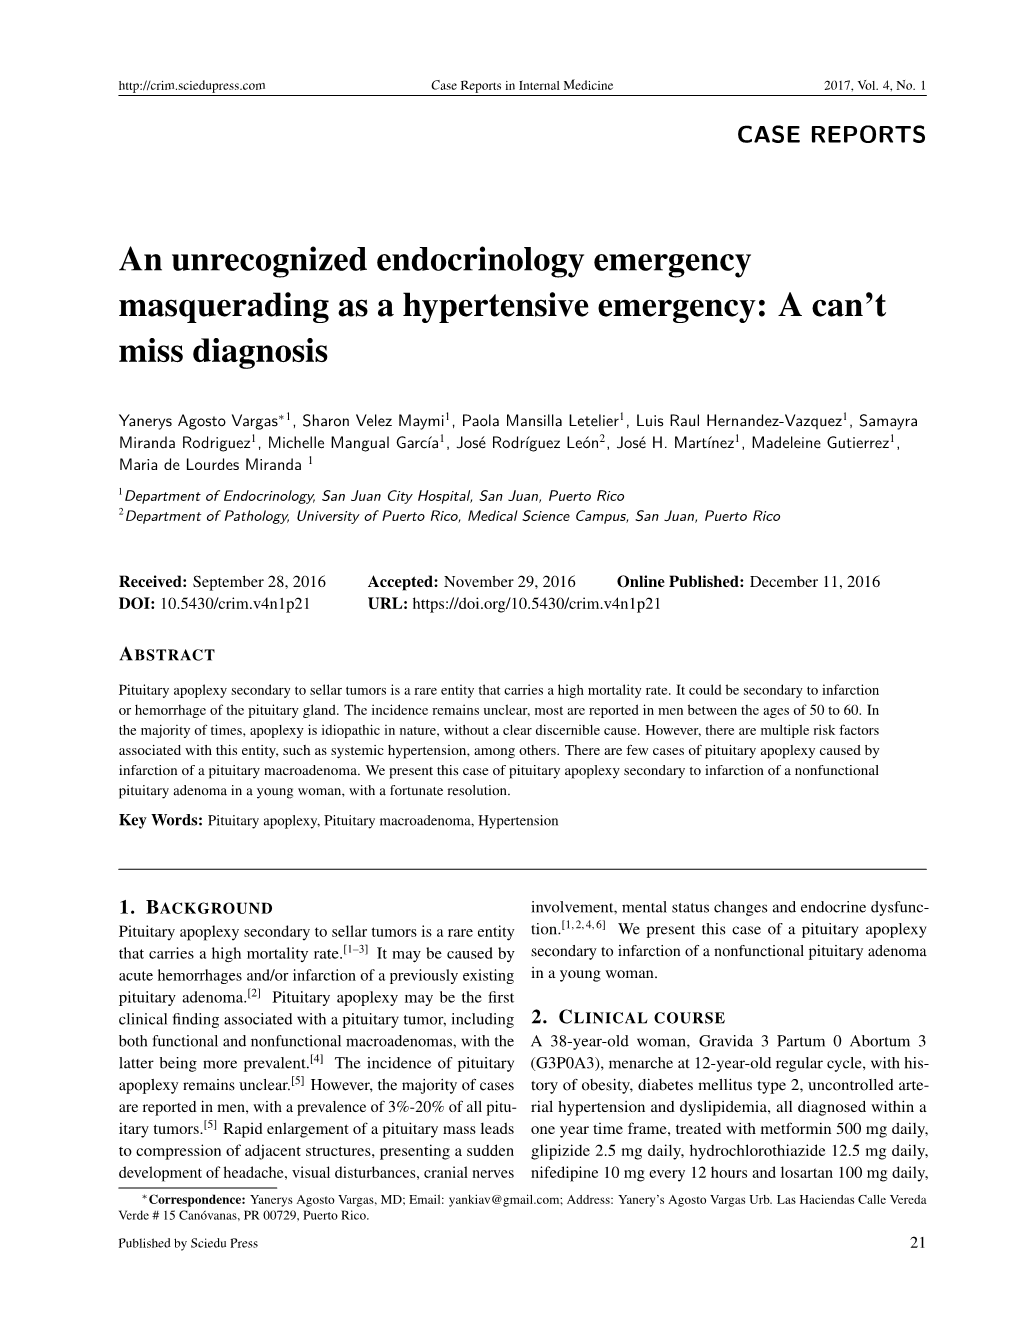 An Unrecognized Endocrinology Emergency Masquerading As a Hypertensive Emergency: a Can't Miss Diagnosis